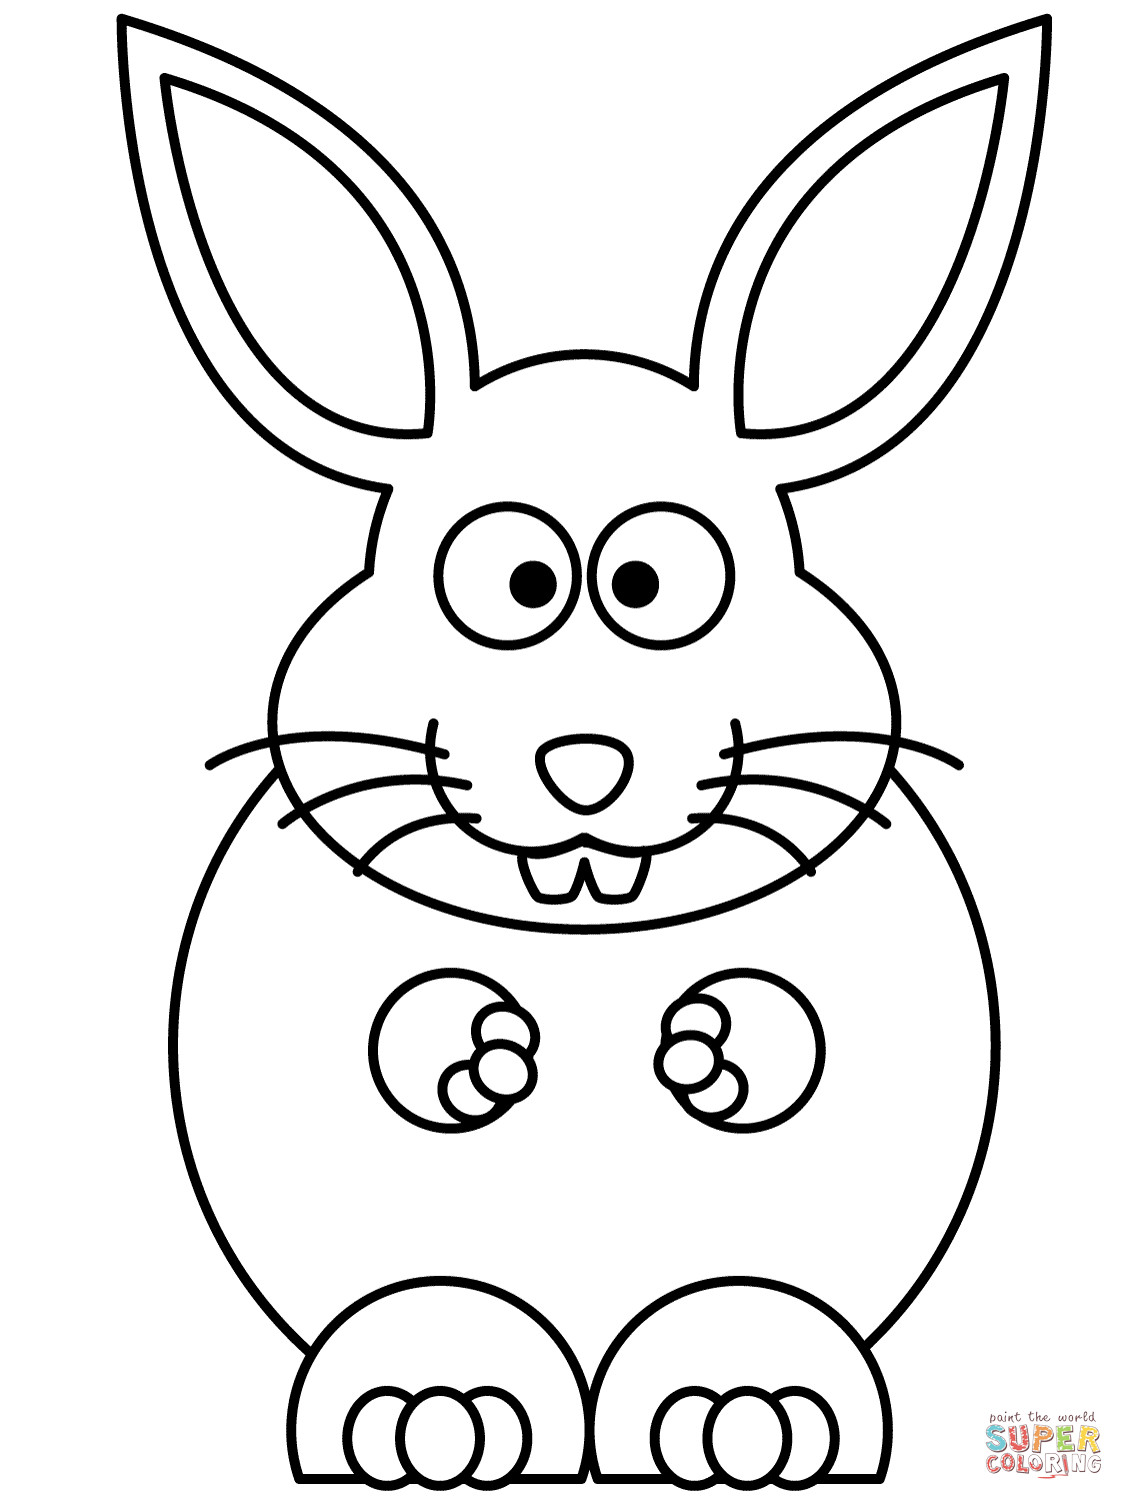 Easy Easter Bunny Coloring Pages at GetColorings.com | Free printable